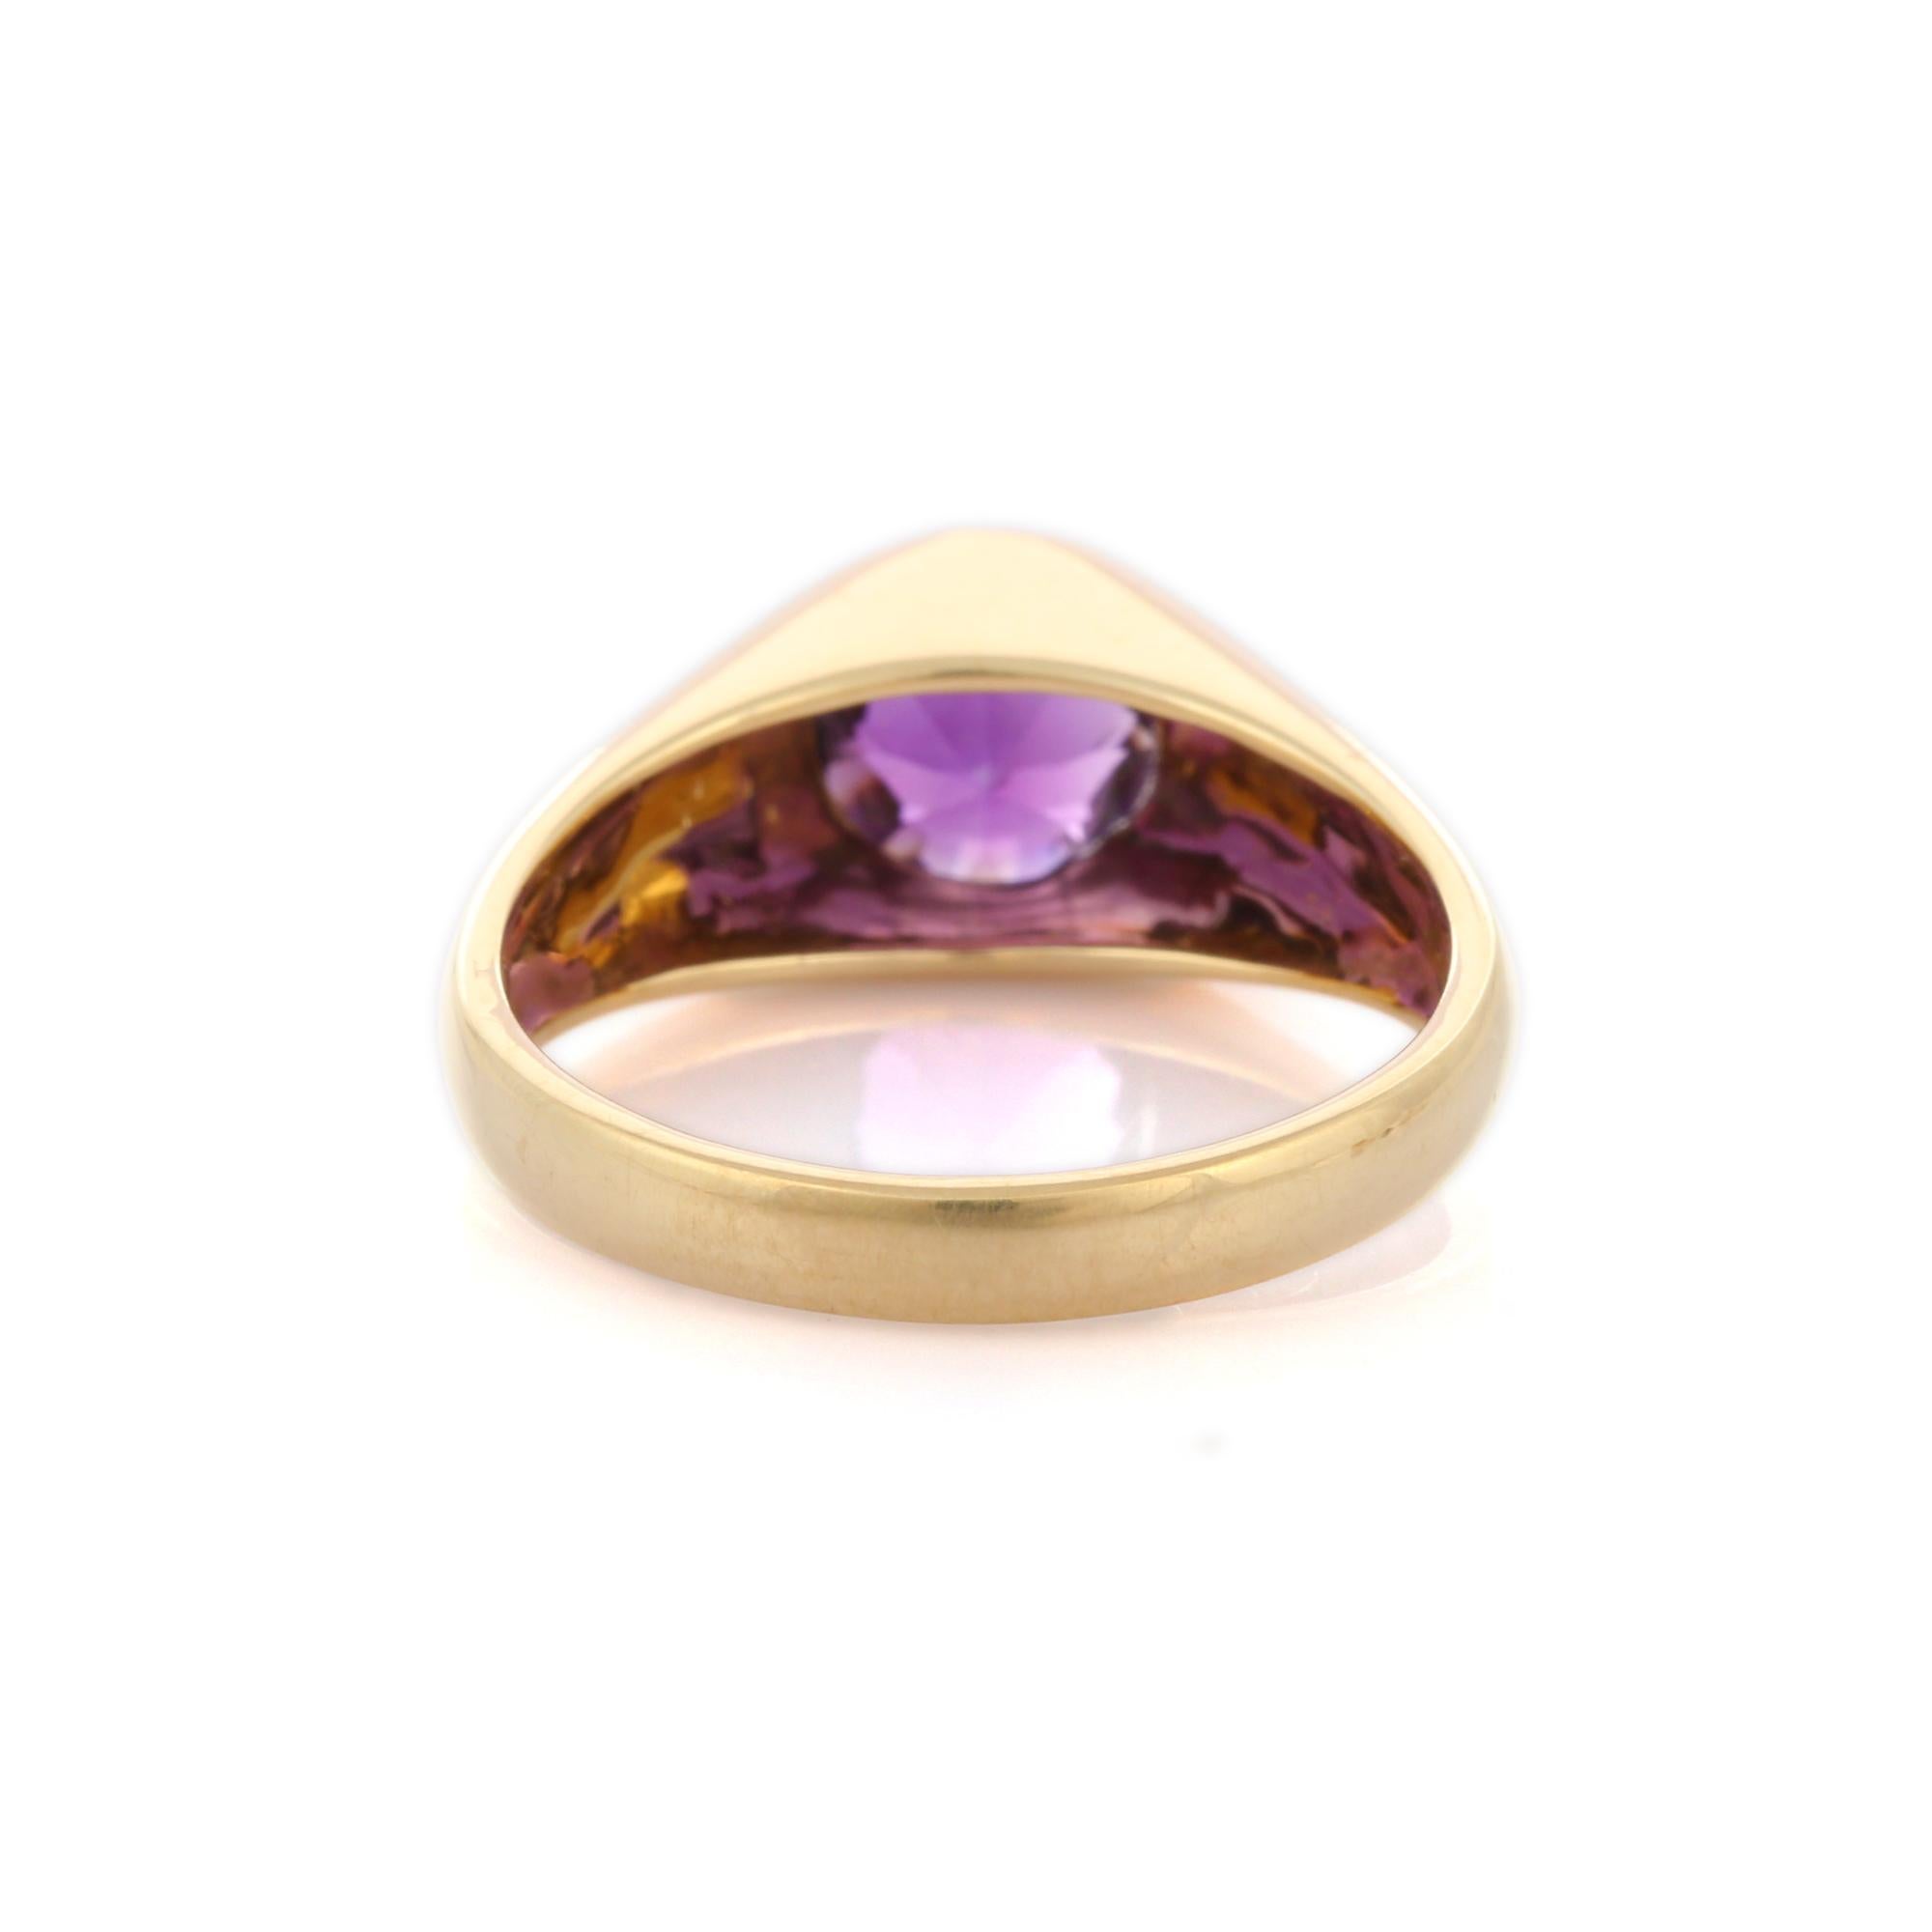 For Sale:  Unisex 14 Karat Yellow Gold Round Cut Amethyst Solitaire Ring 5